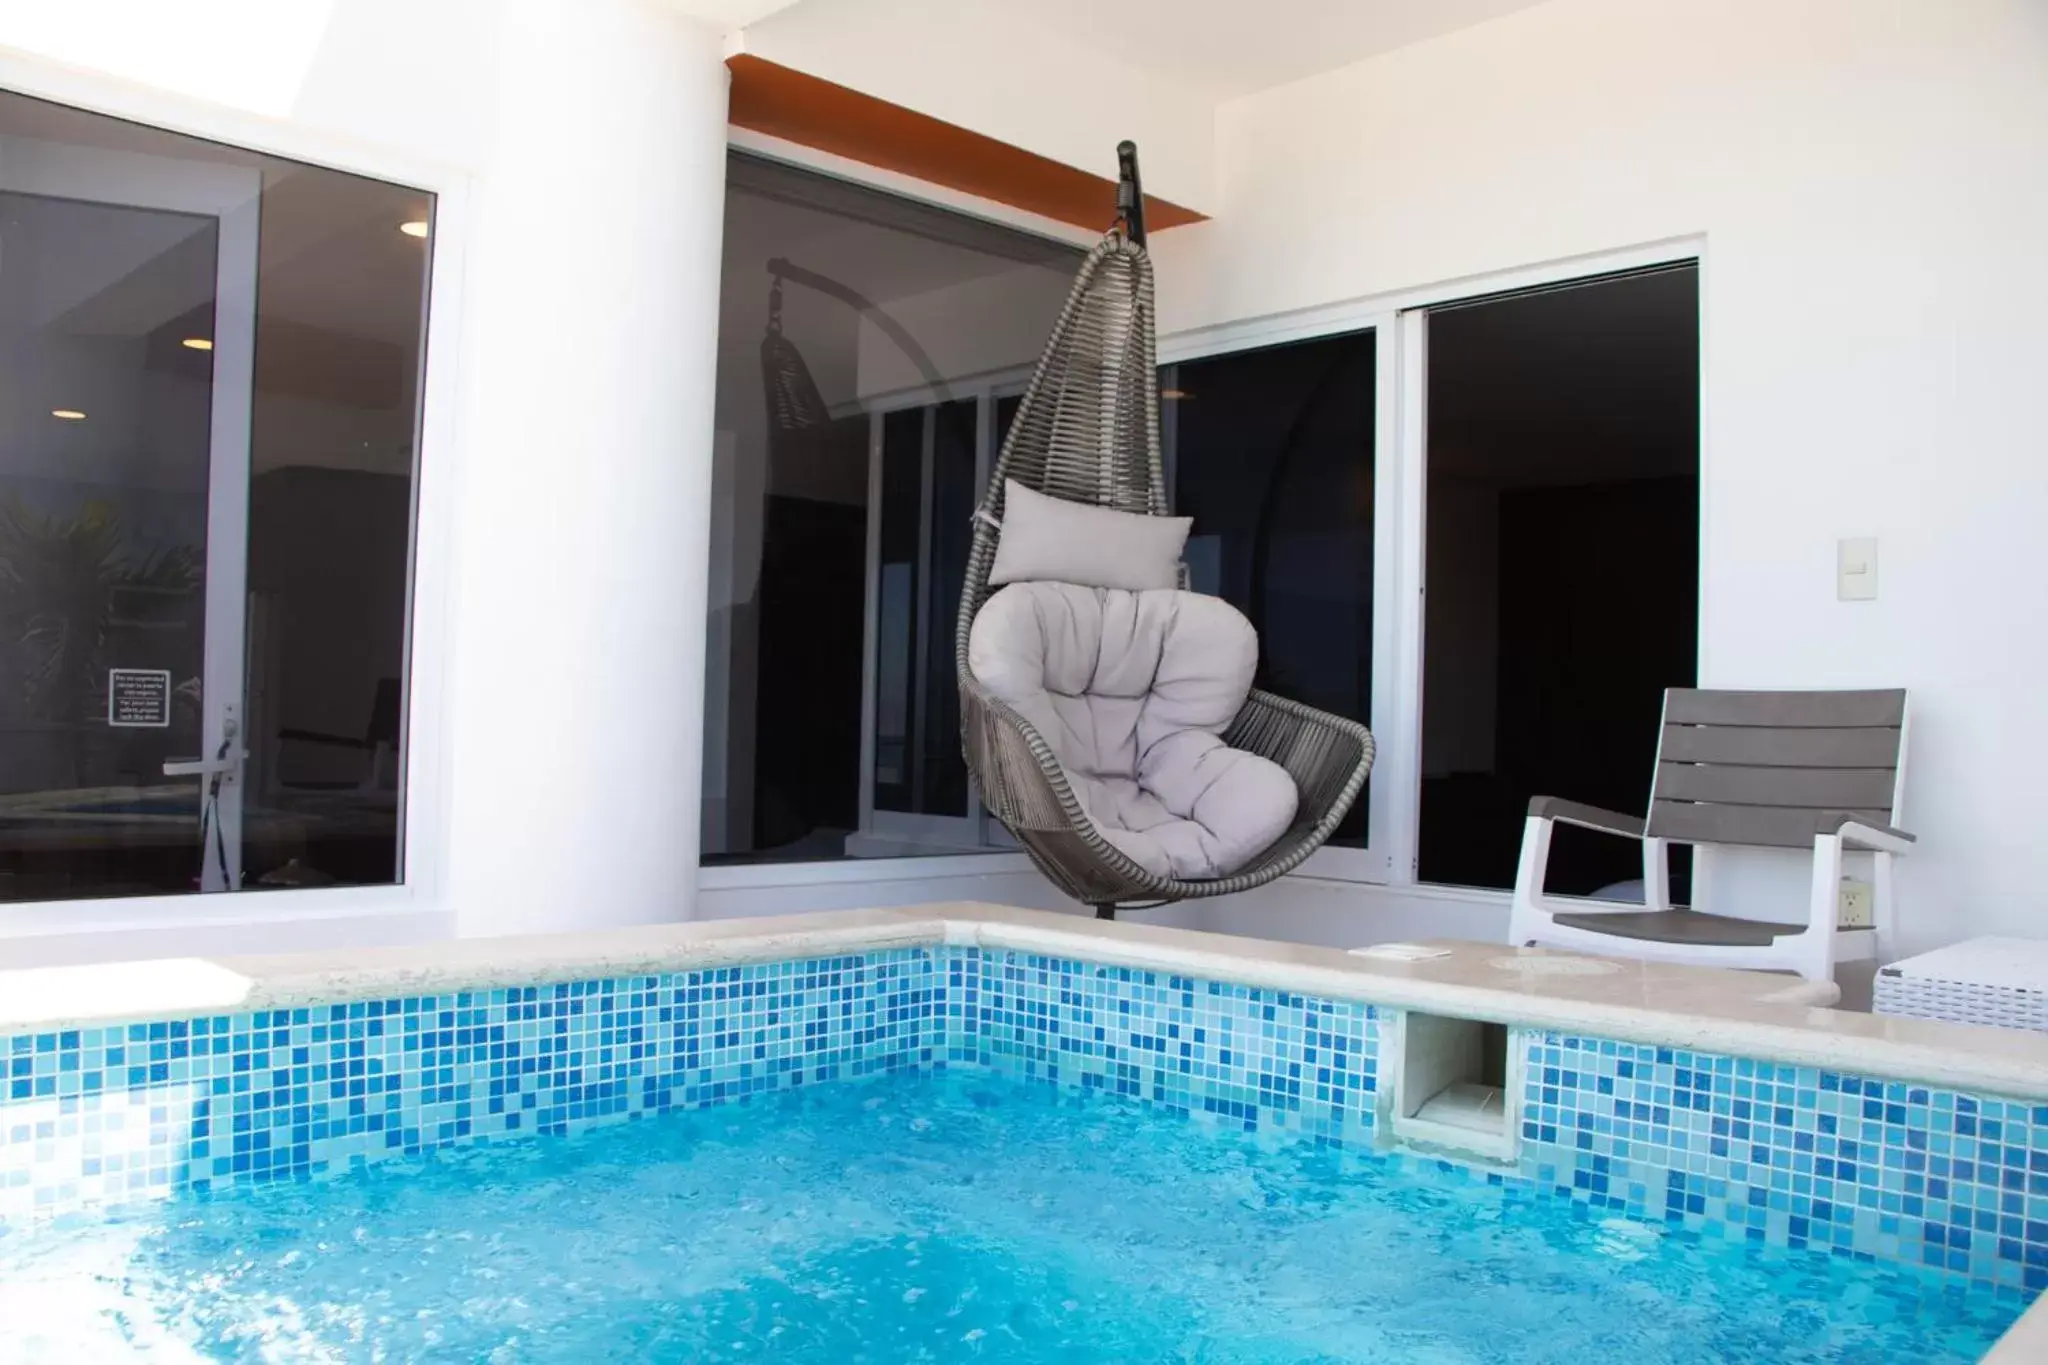 Hot Tub, Swimming Pool in The Paramar Beachfront Boutique Hotel With Breakfast Included - Downtown Malecon